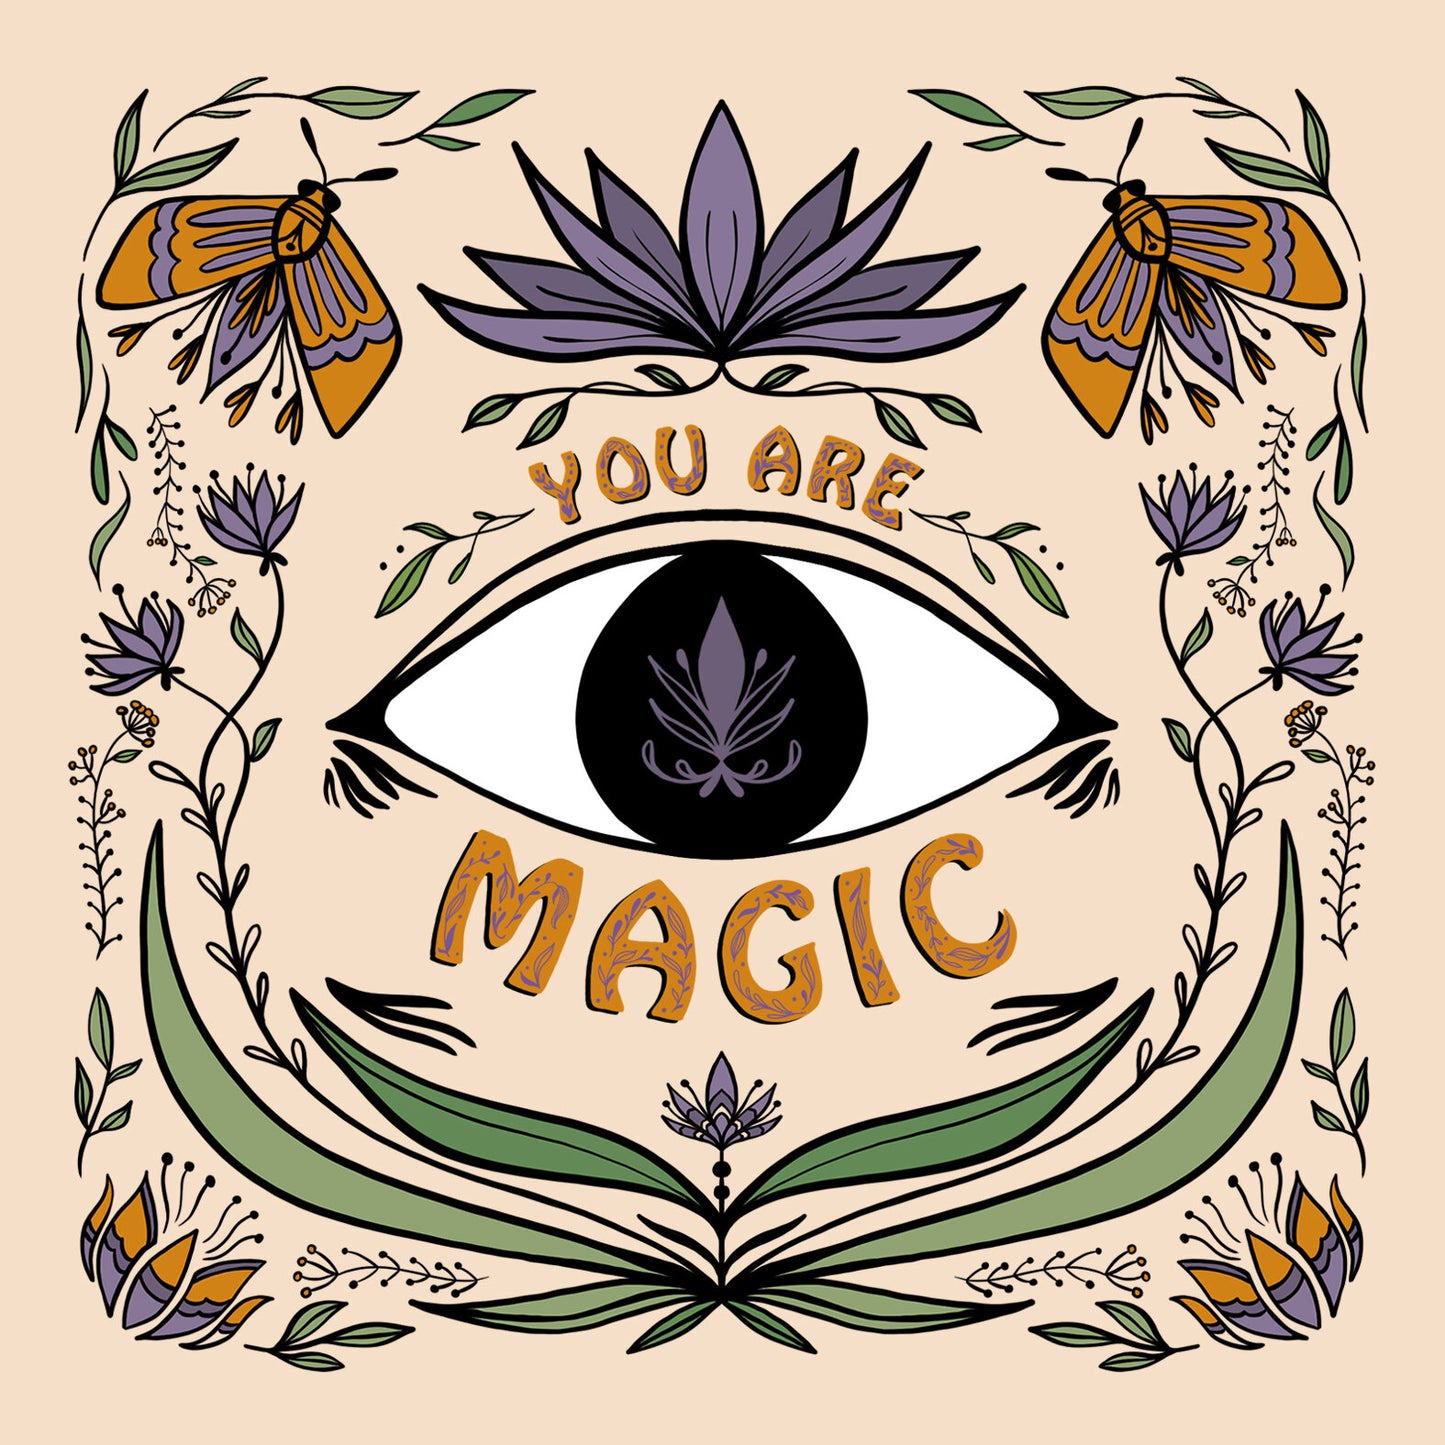 You are Magic Greeting Card